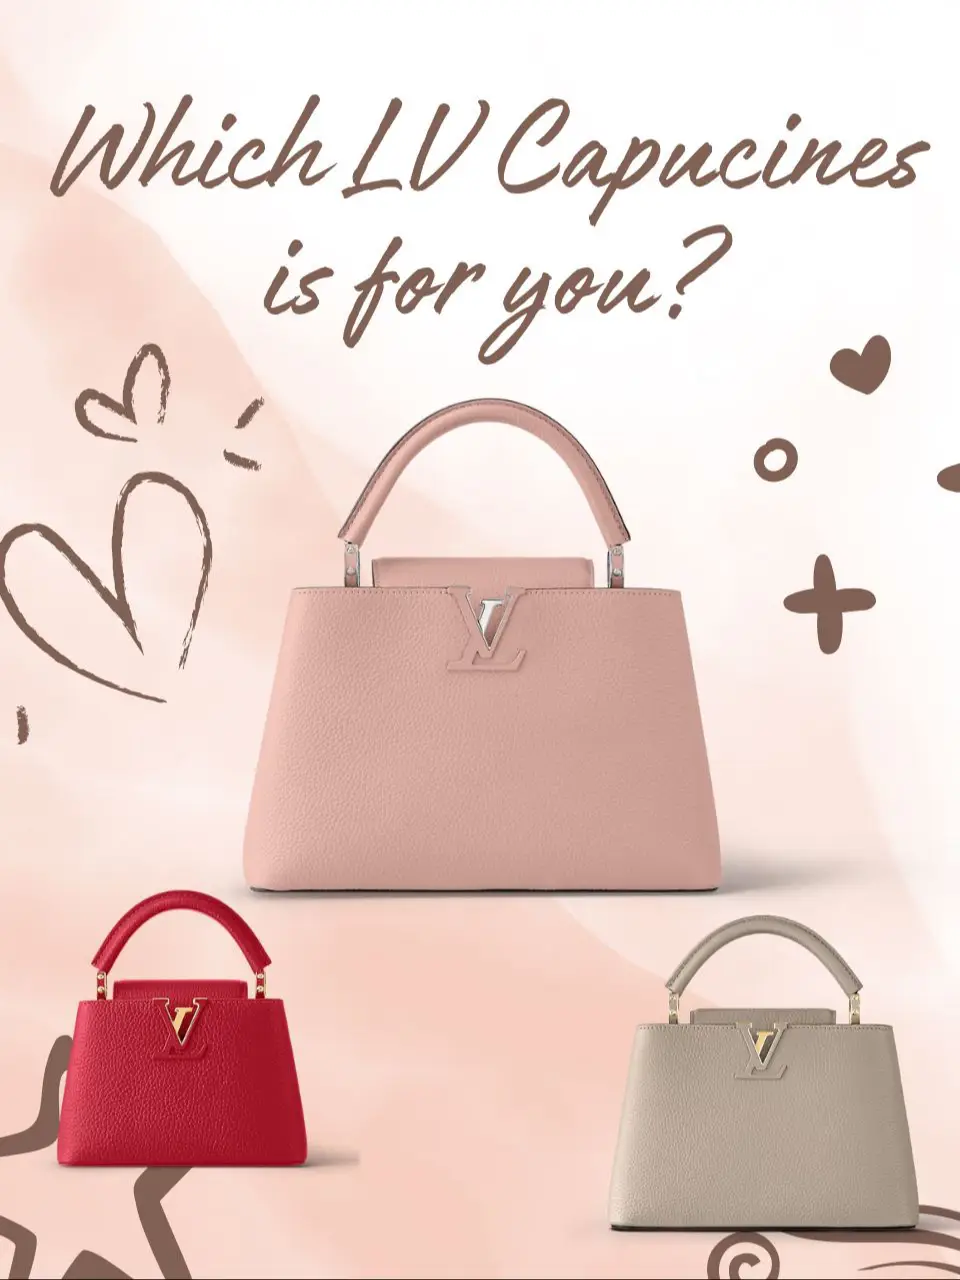 Which LV Capucines is for you? 👜🤩✨, Article posted by Savi Chow